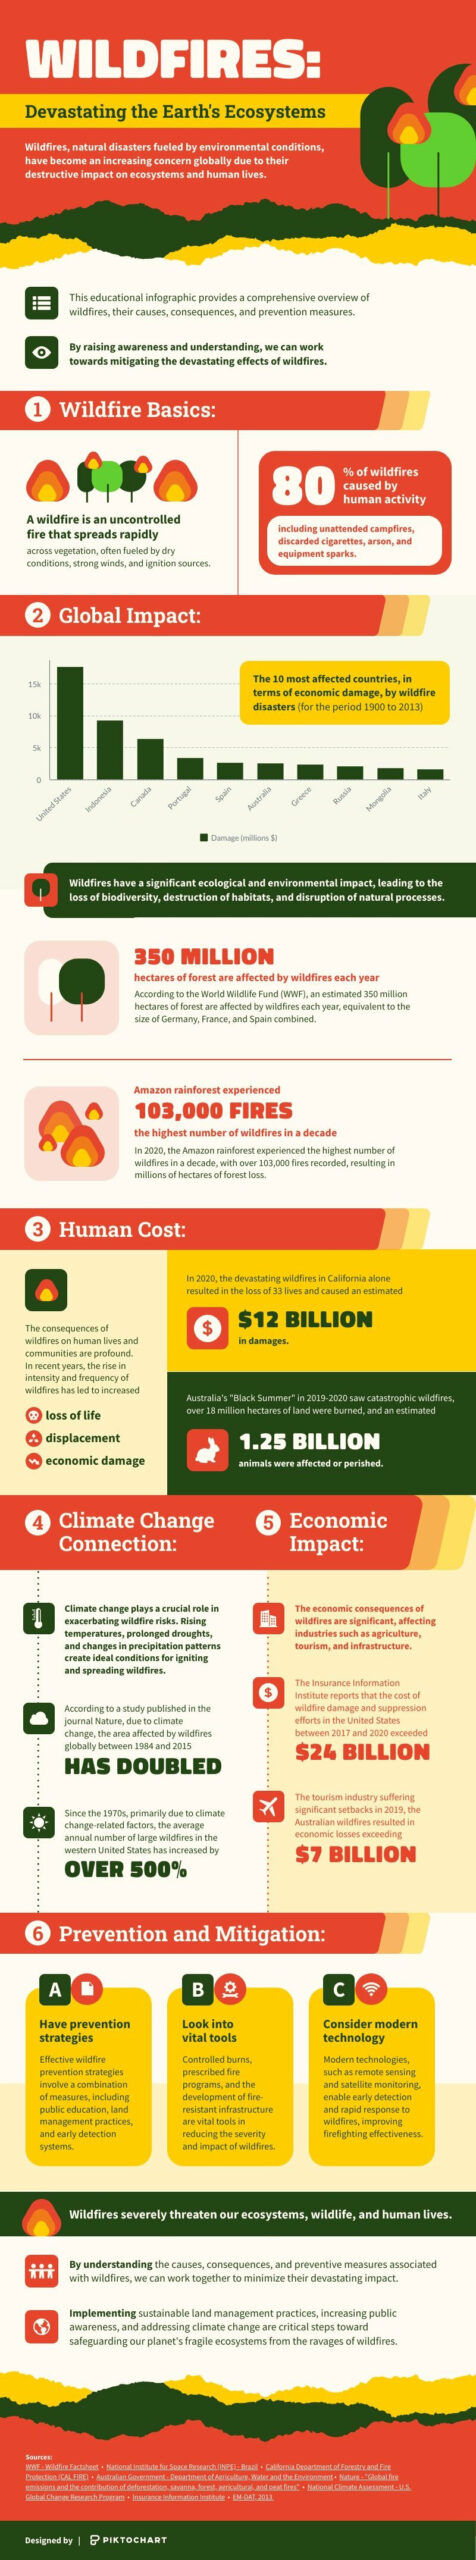 Facts About Wildfires